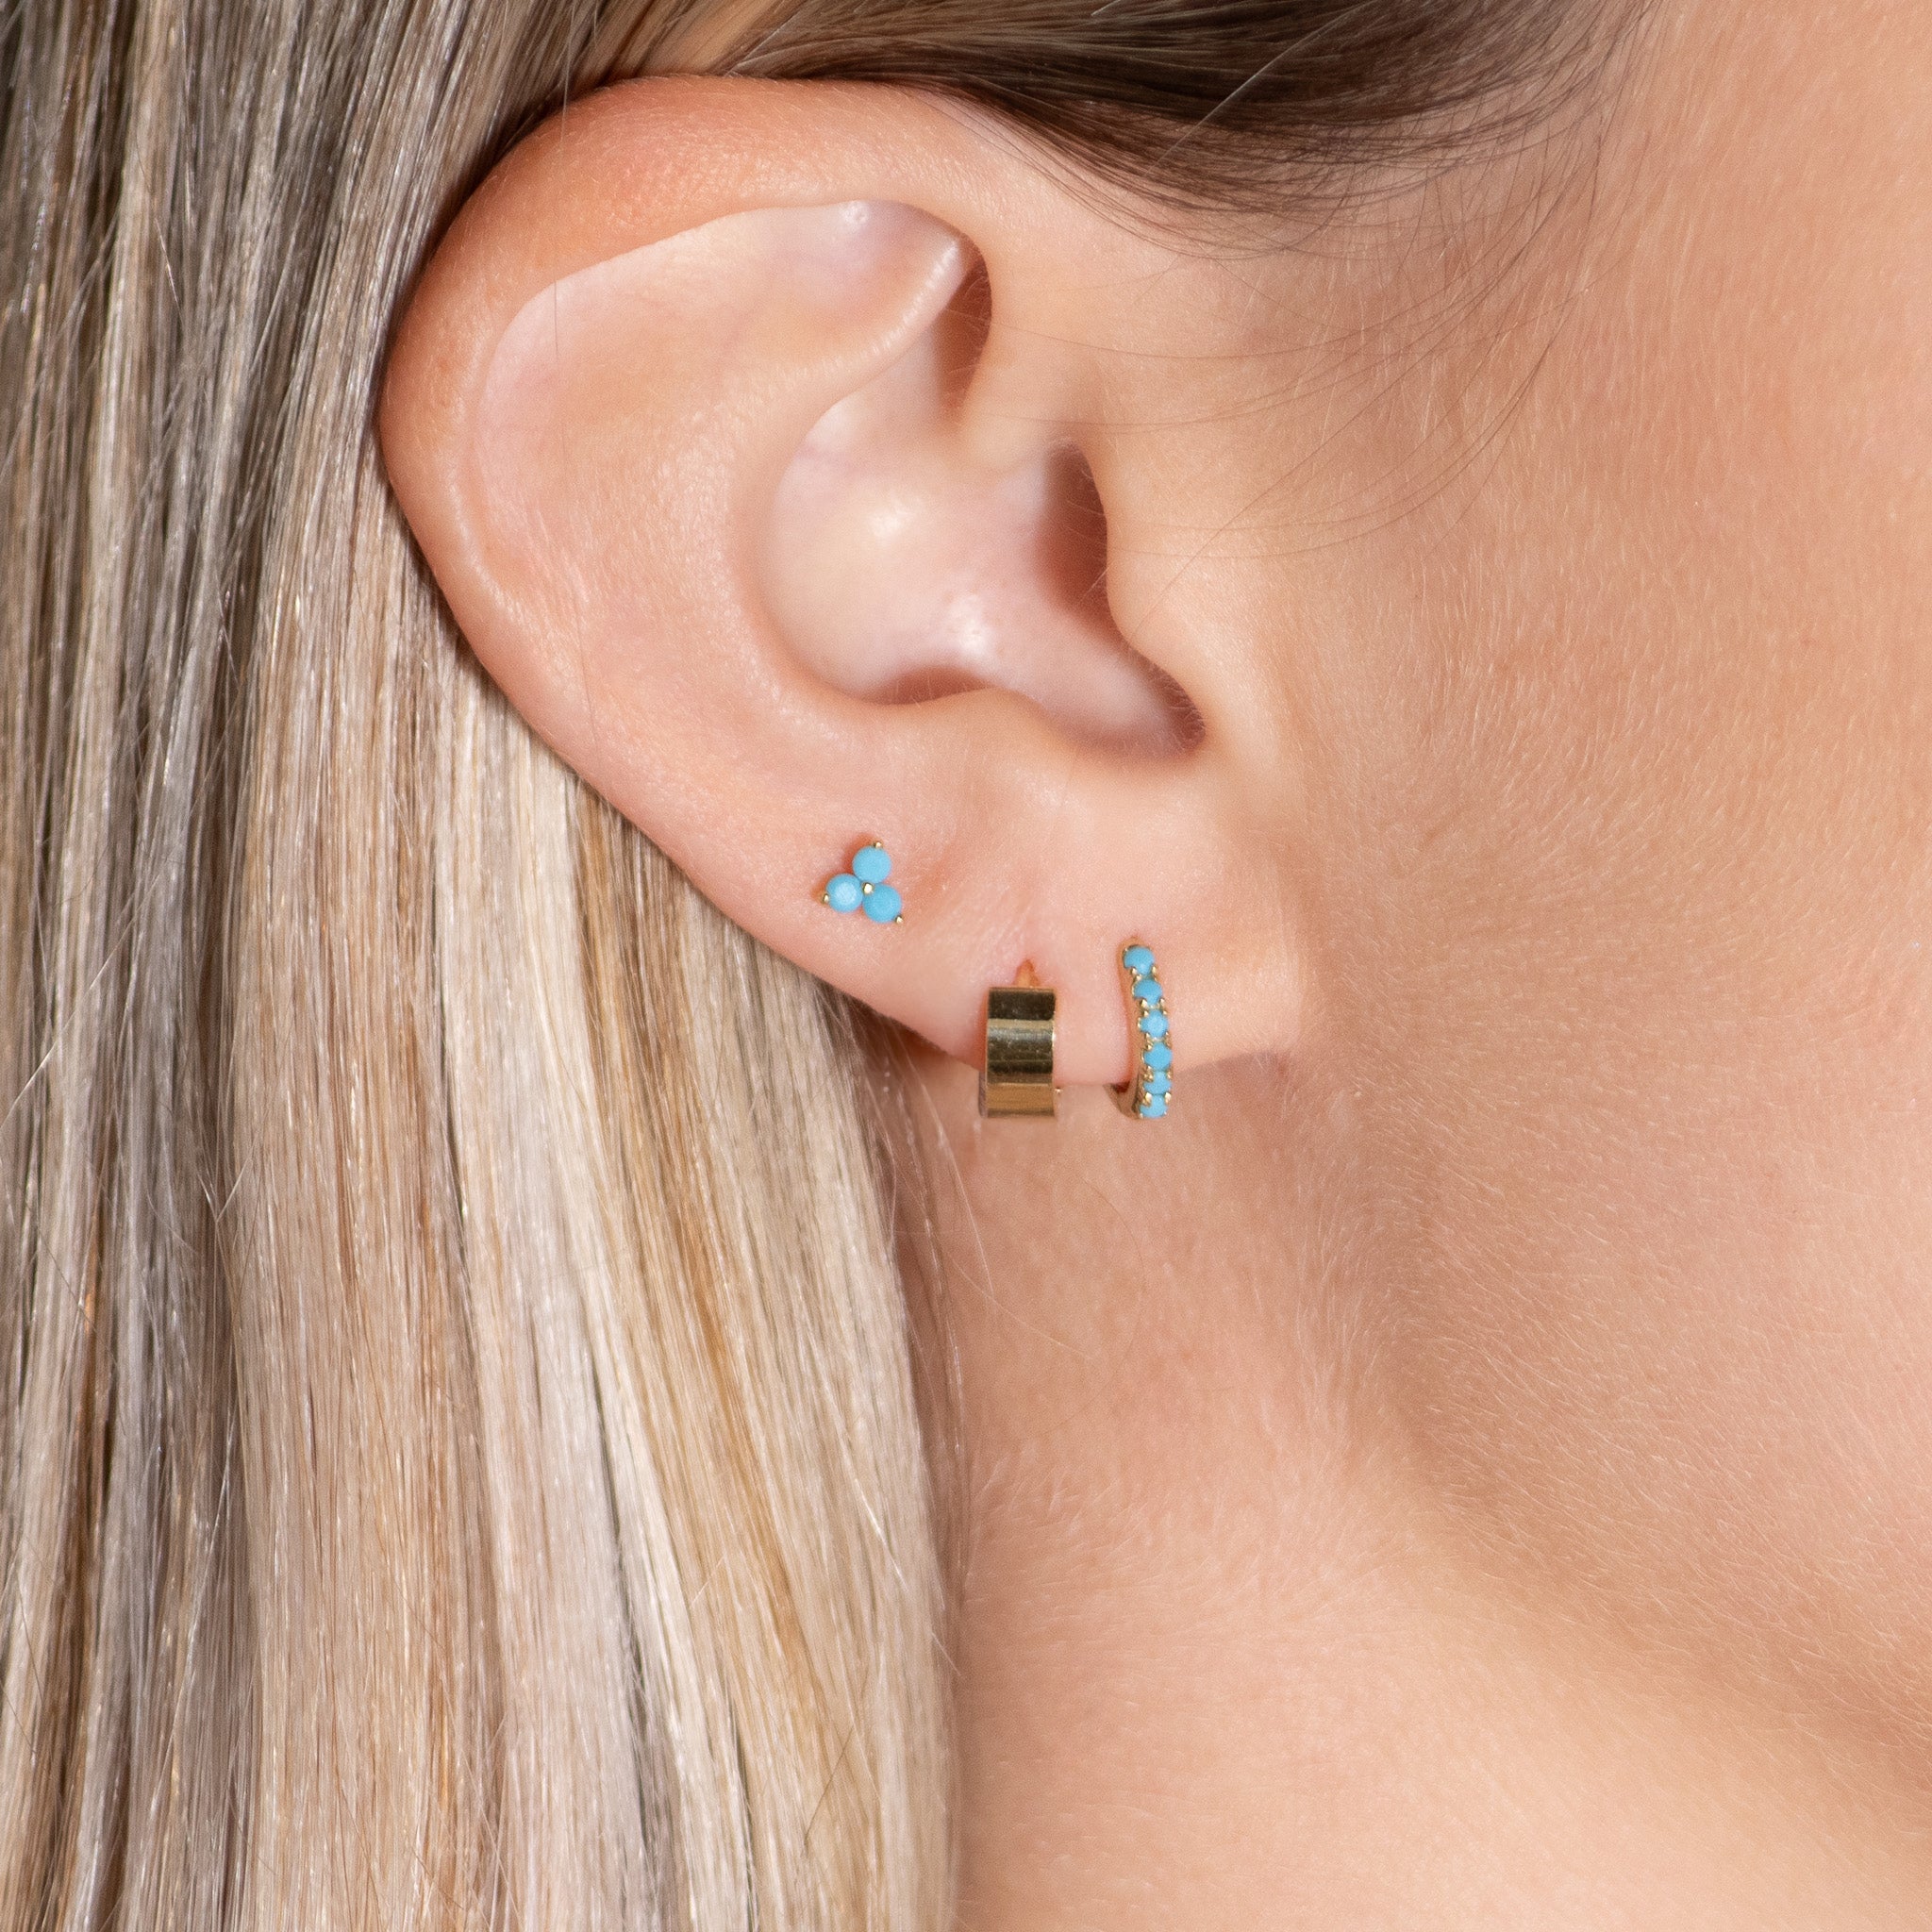 Turquoise Trinity Cluster Stud Earrings Earrings Estella Collection #product_description# 17740 14k Birthstone Earrings #tag4# #tag5# #tag6# #tag7# #tag8# #tag9# #tag10#